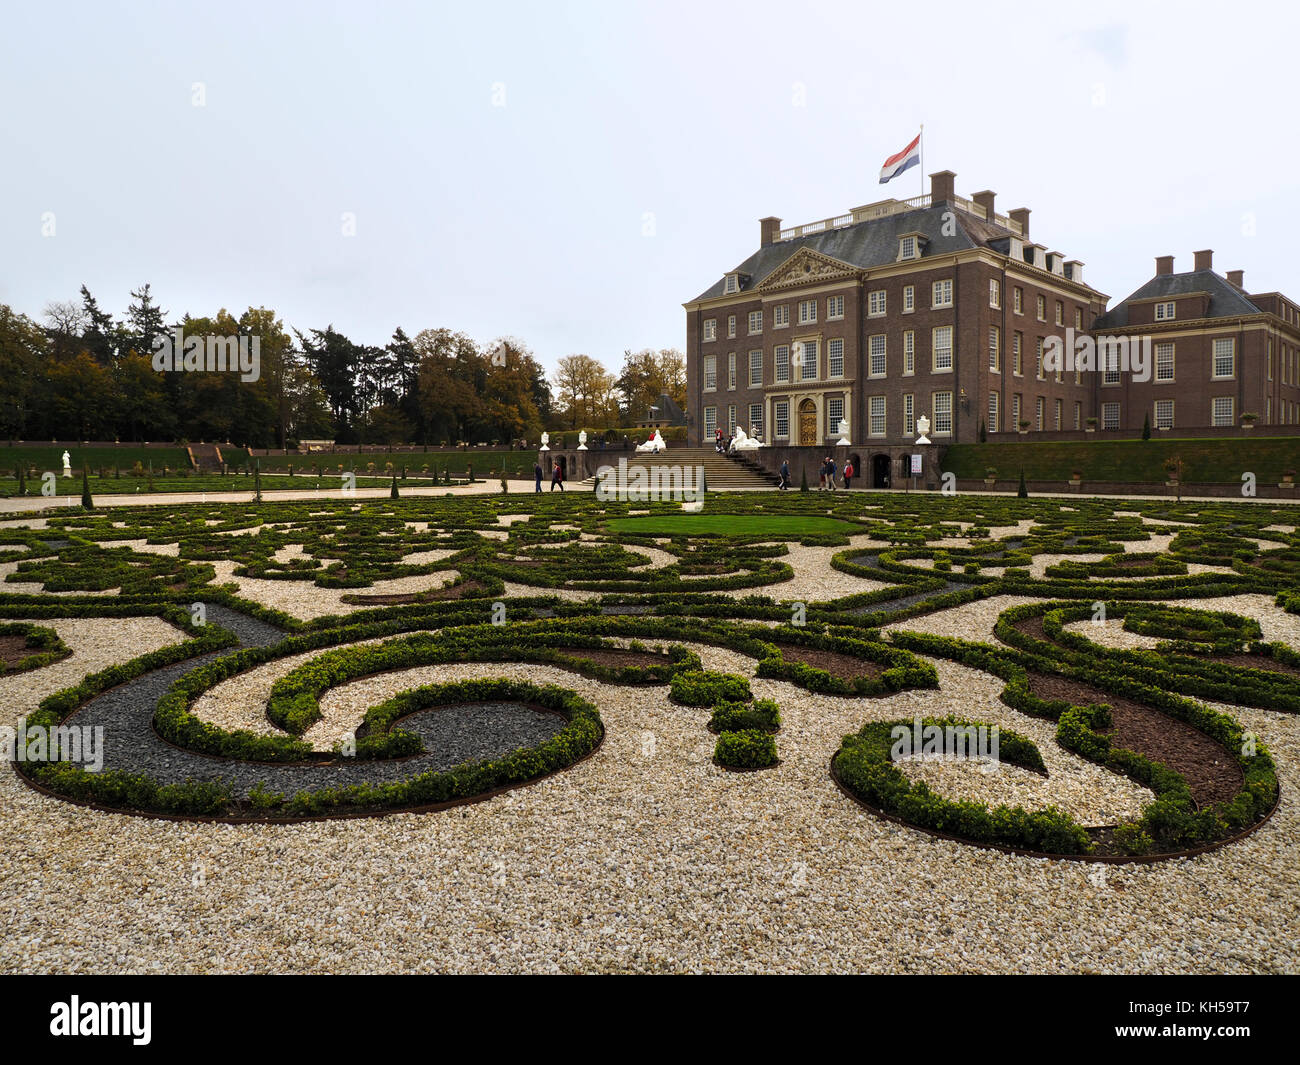 Palace het Loo of the Dutch Royal Family is open to the public, including the magnificent gardens. Apeldoorn, Gelderland, the Netherlands. Stock Photo